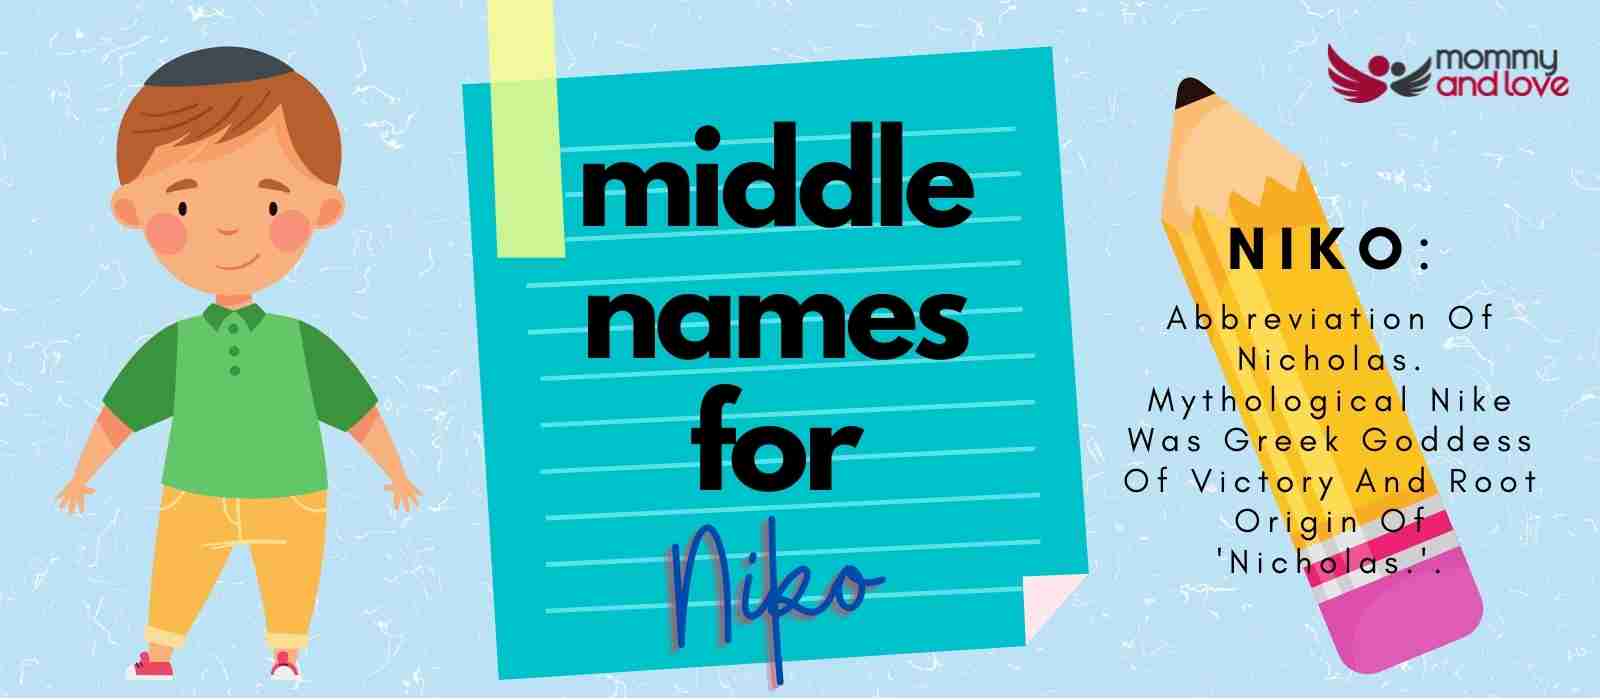 Middle Names for Niko